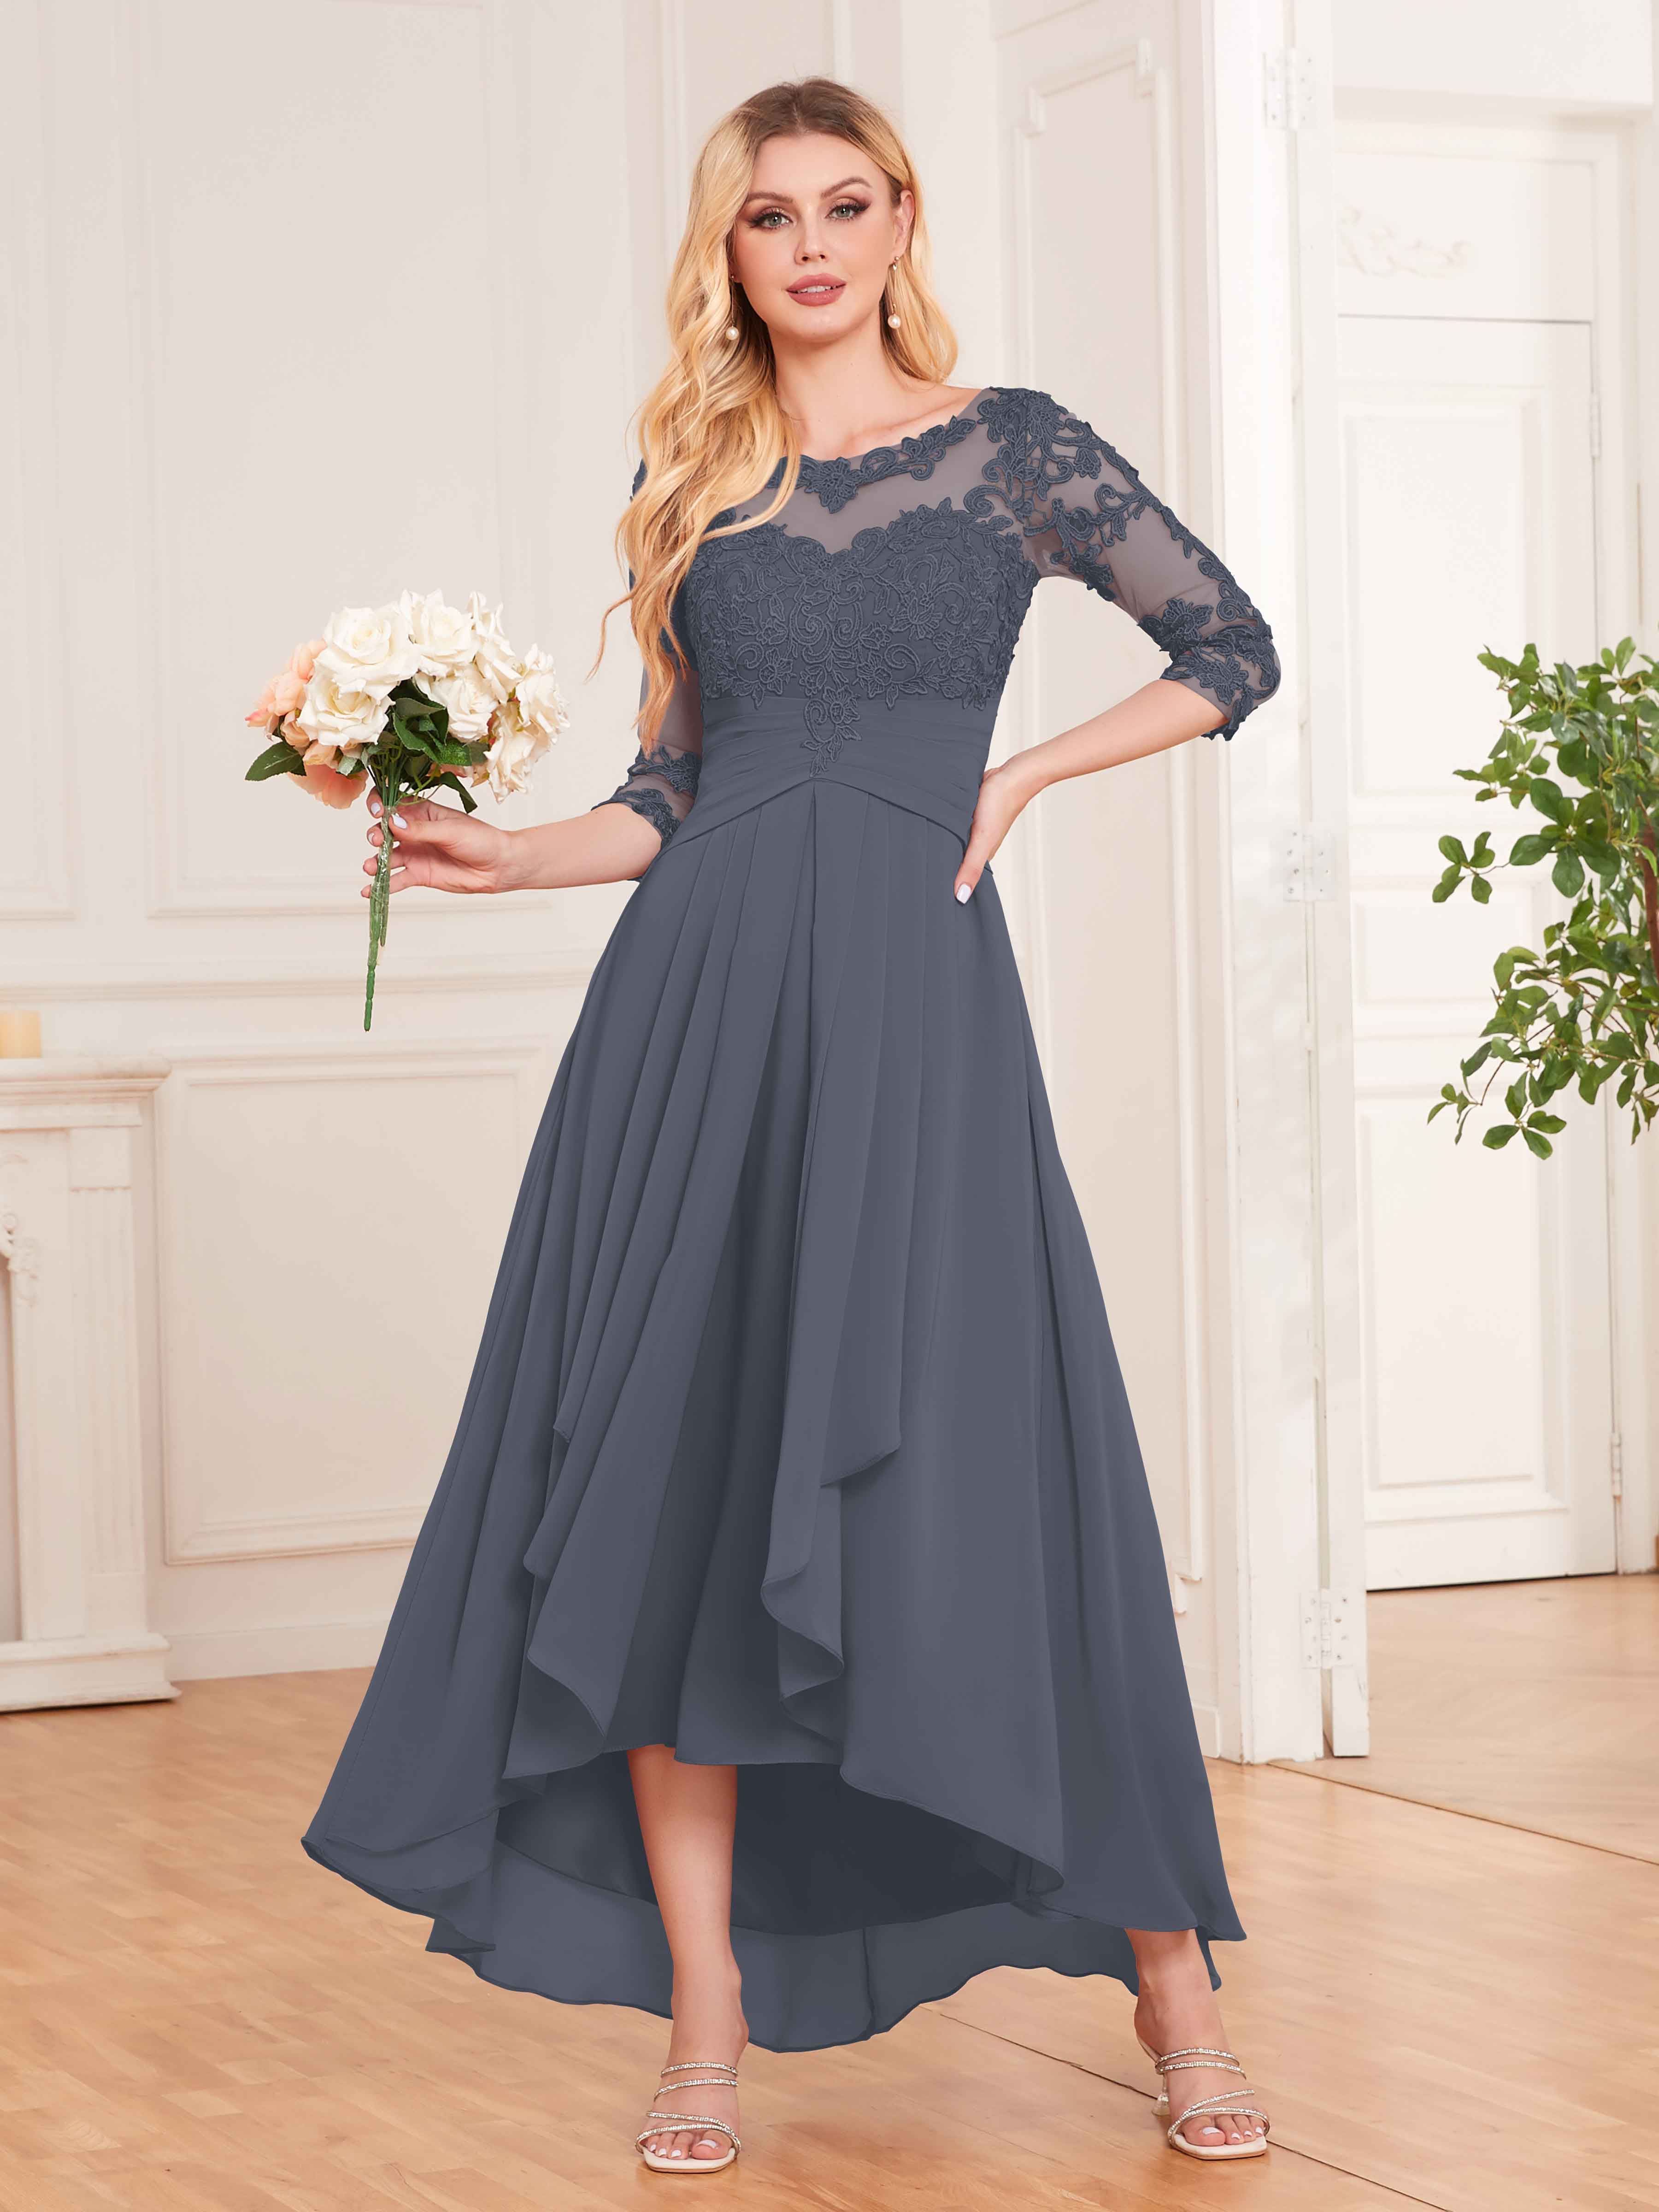 Shop Gorgeous Stormy Bridesmaid Dresses from $59 - Free Customize Size ...